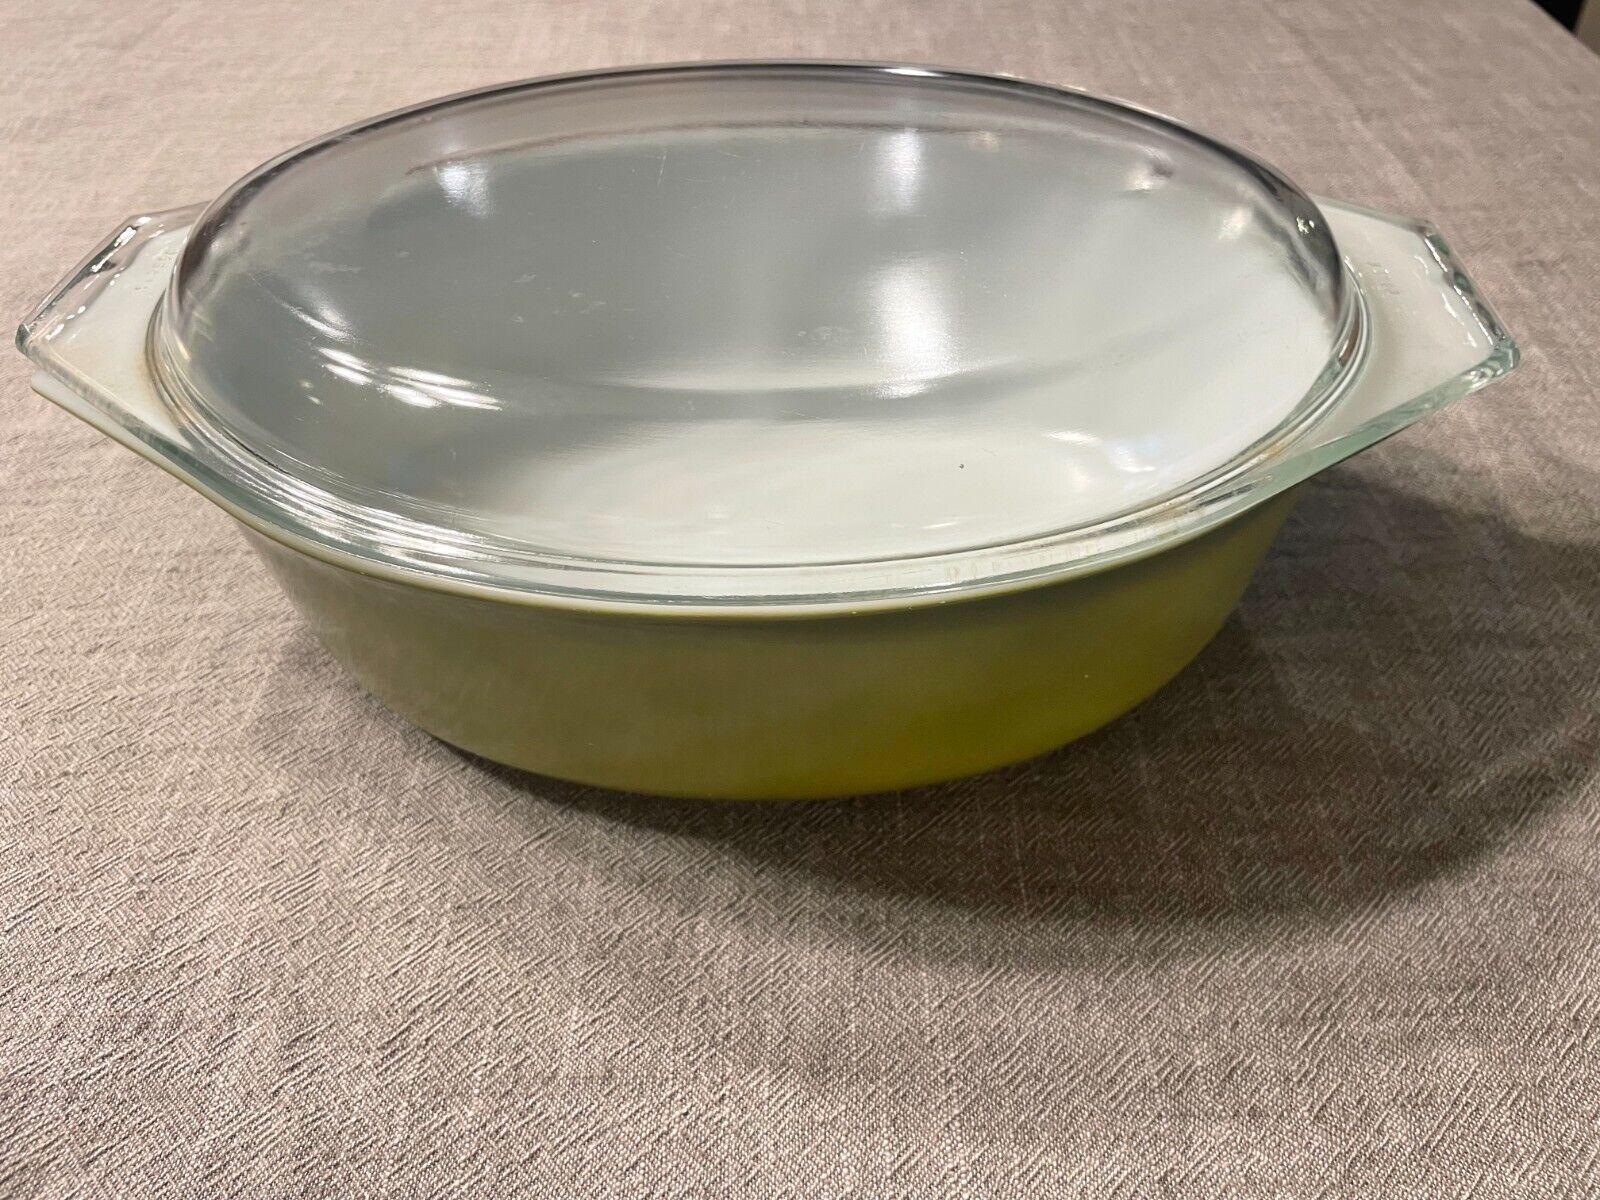 Vintage Pyrex Green 2-1/2 Quart Oval Casserole Dish with lid